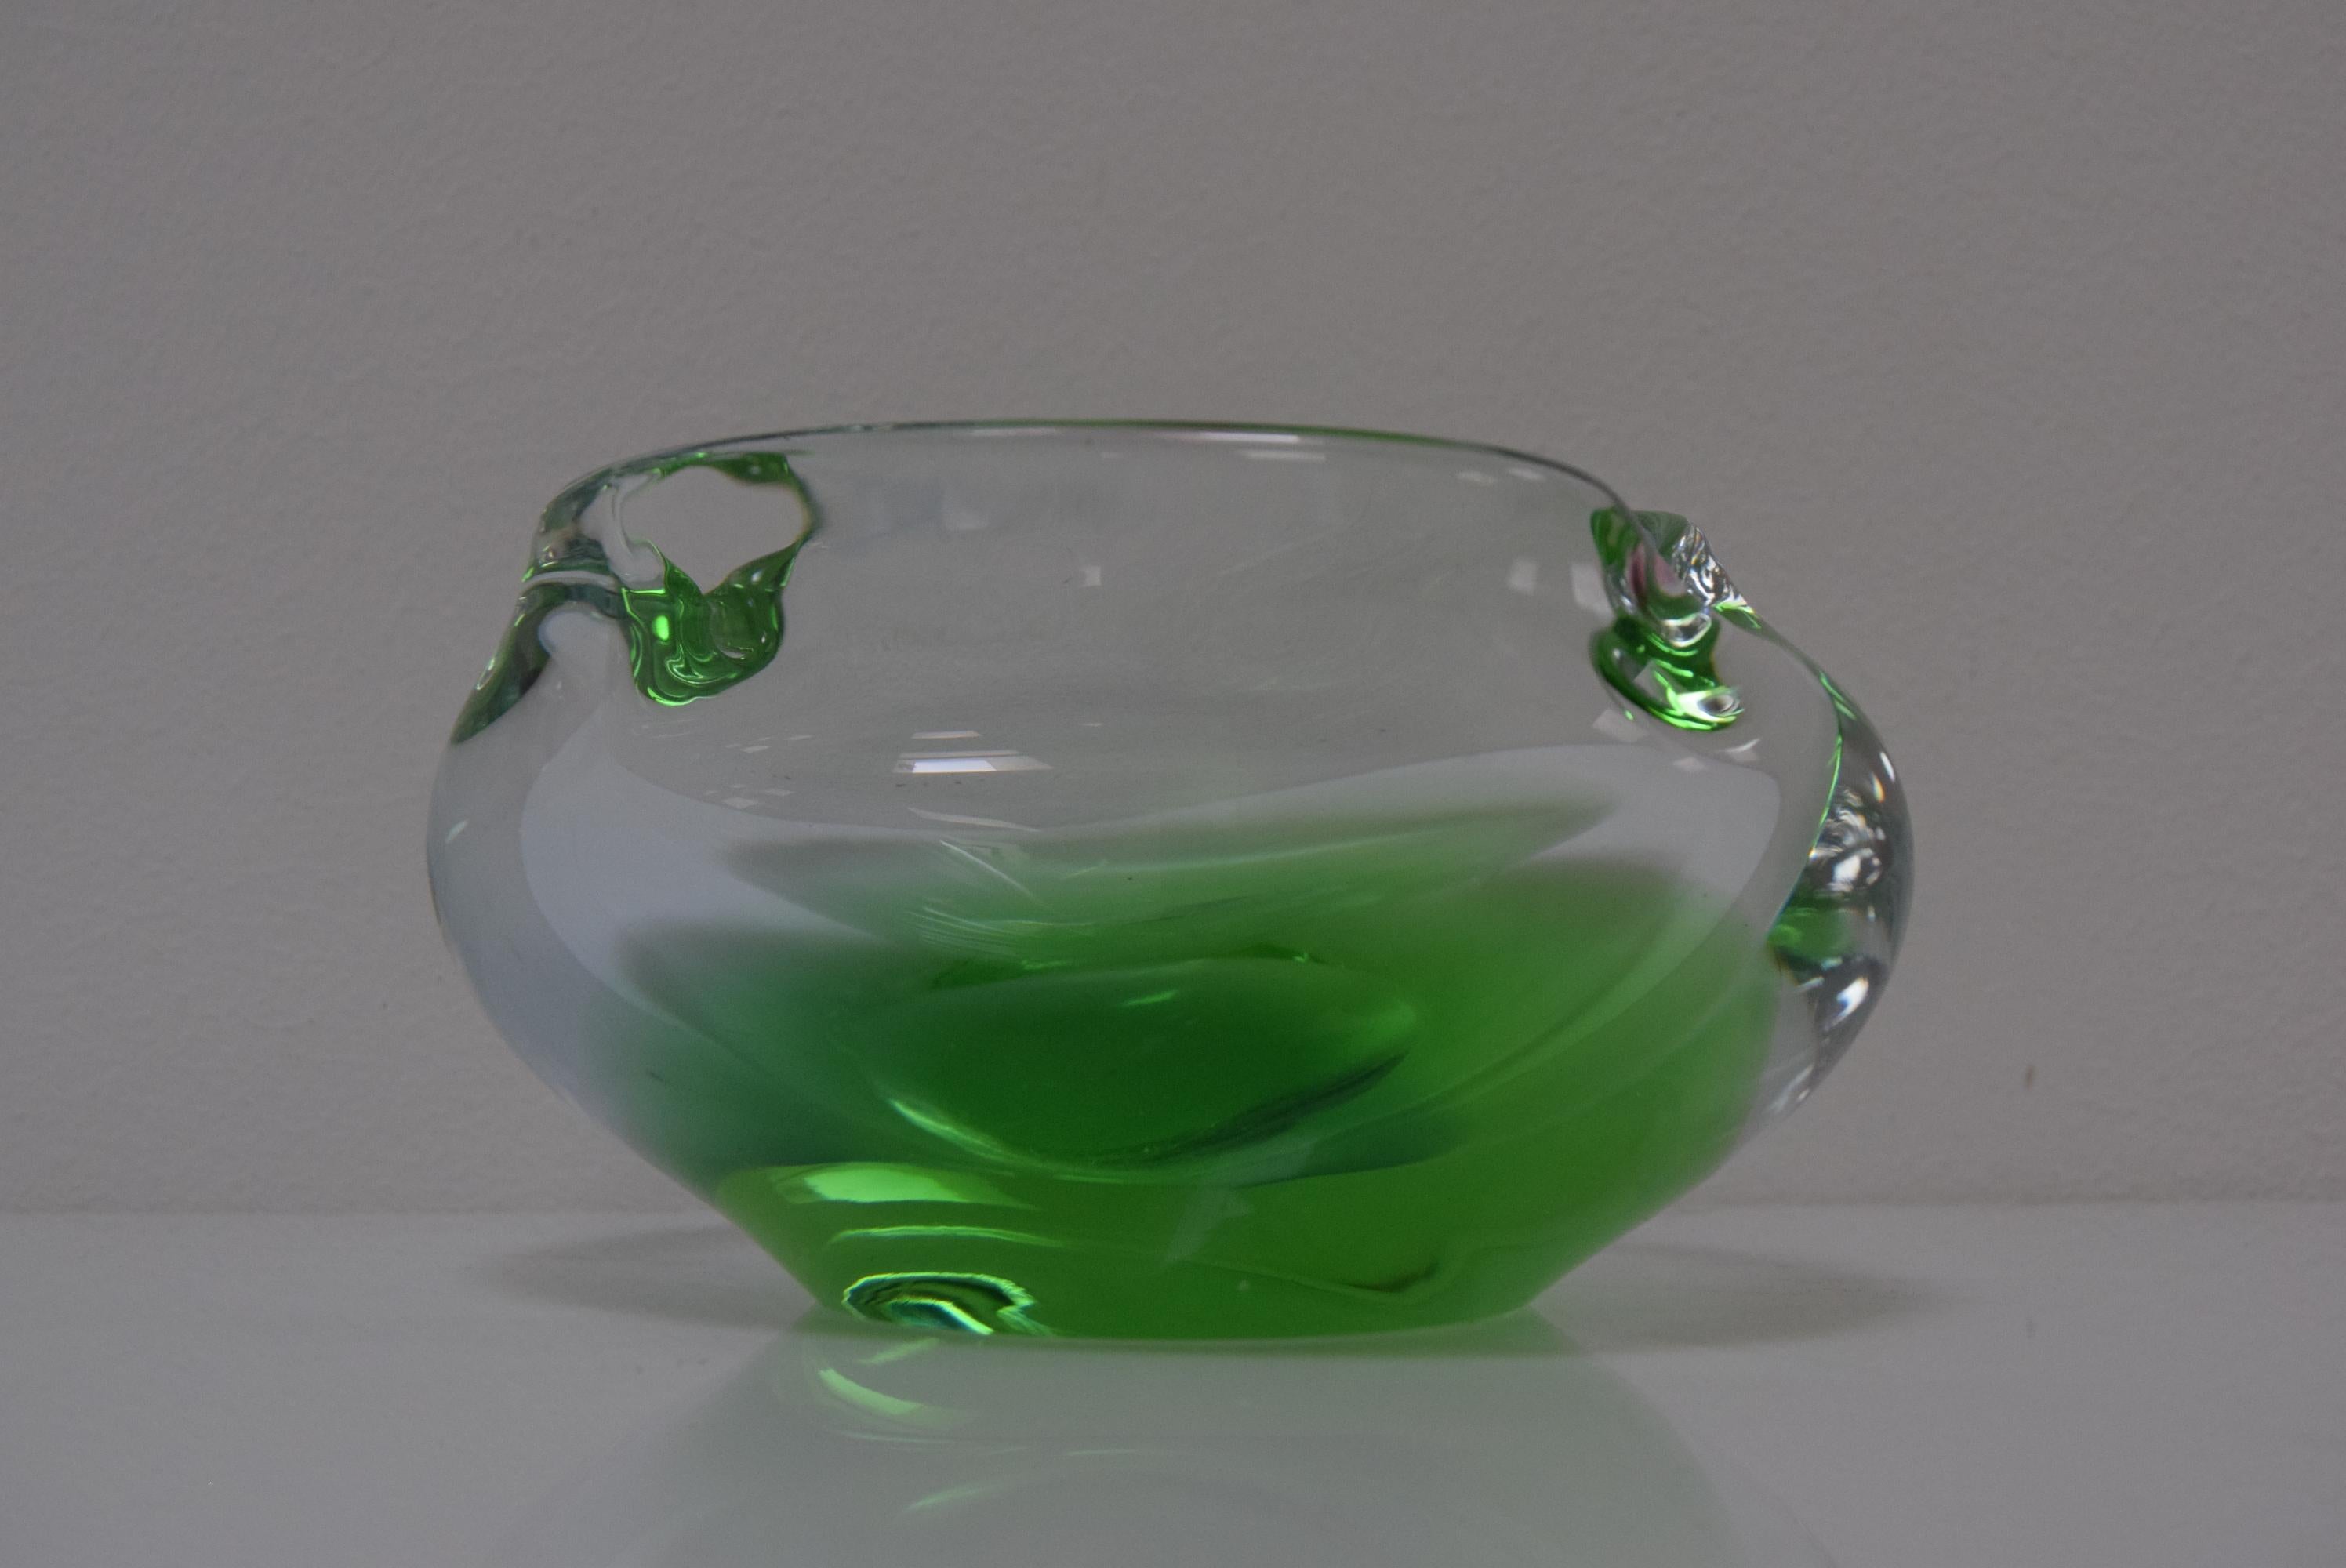 Made in Czechoslovakia
Made of Art Glass
Re-polished
Good Original condition.